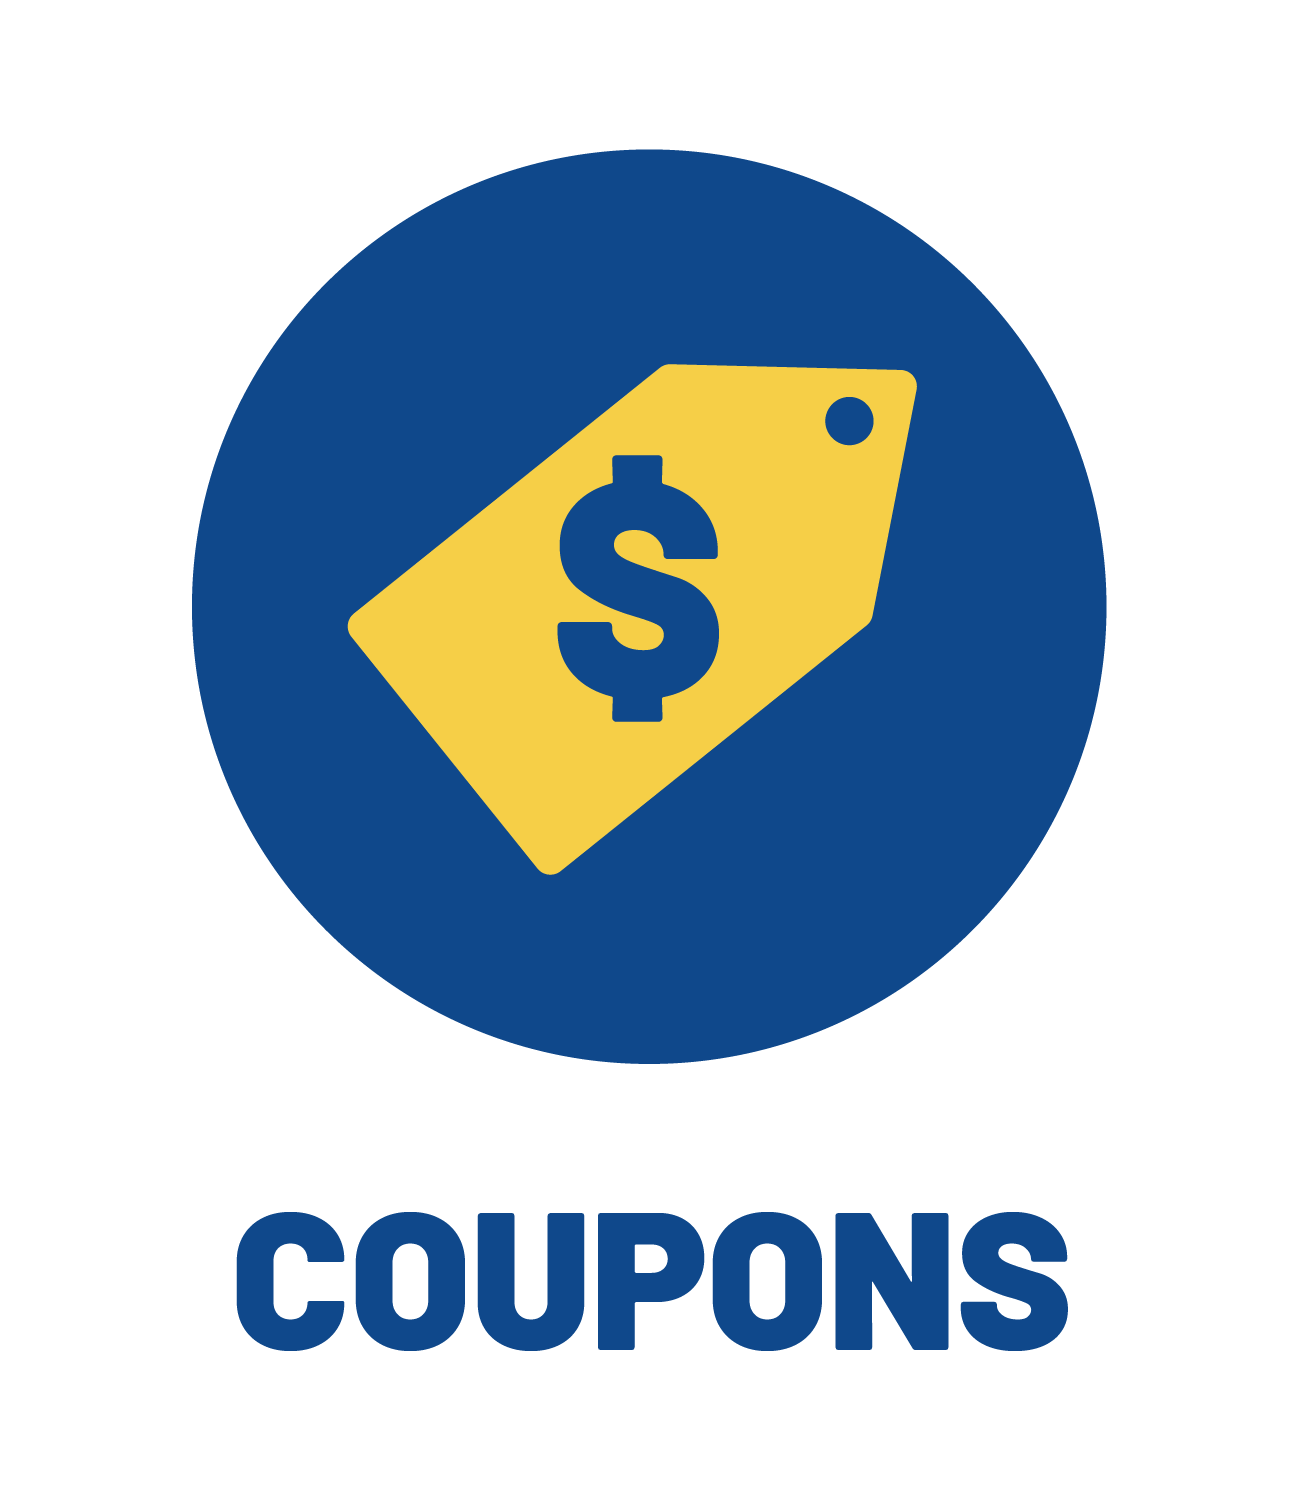 Learn more about coupons and promotions